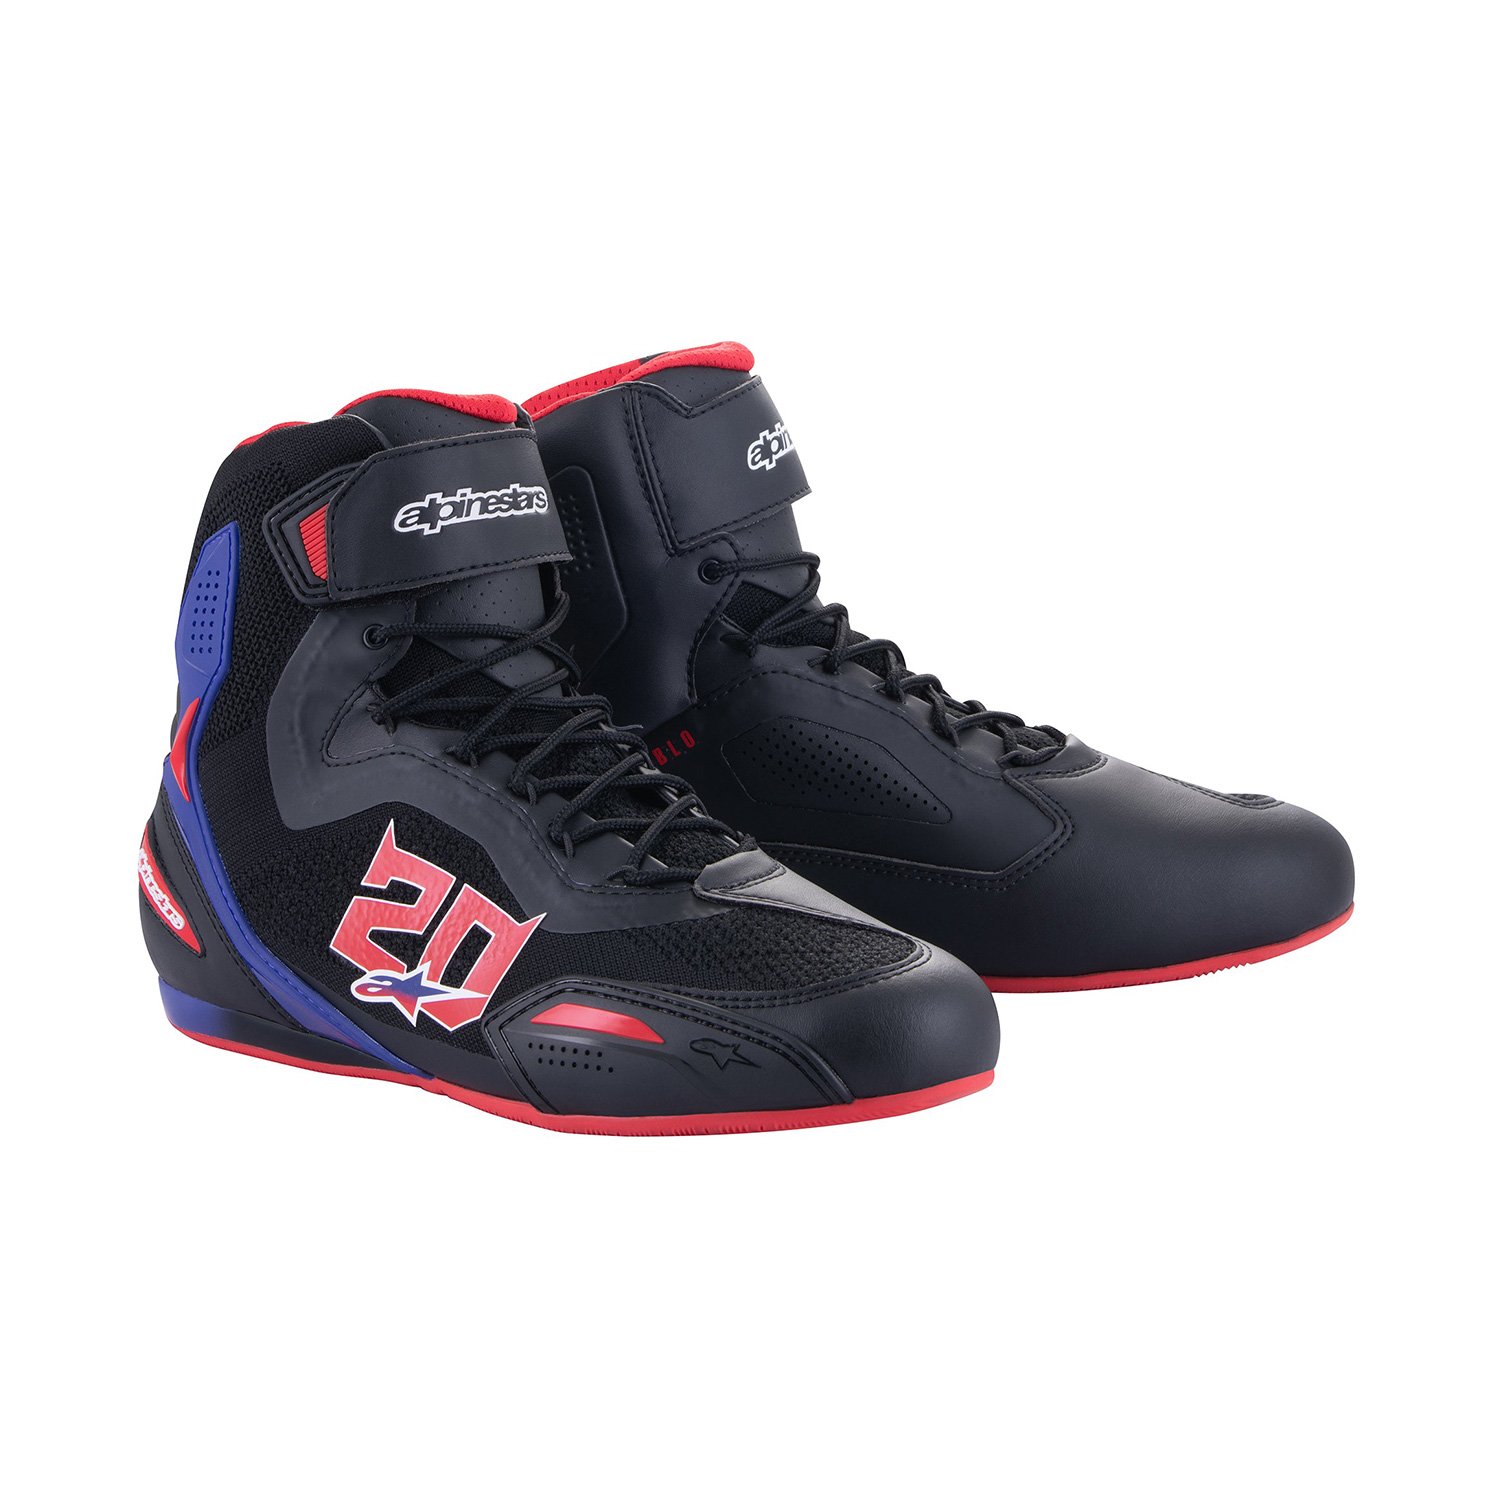 Image of EU Alpinestars FQ20 Faster-3 Rideknit Noir Bright Rouge Bleu Chaussures Taille US 9